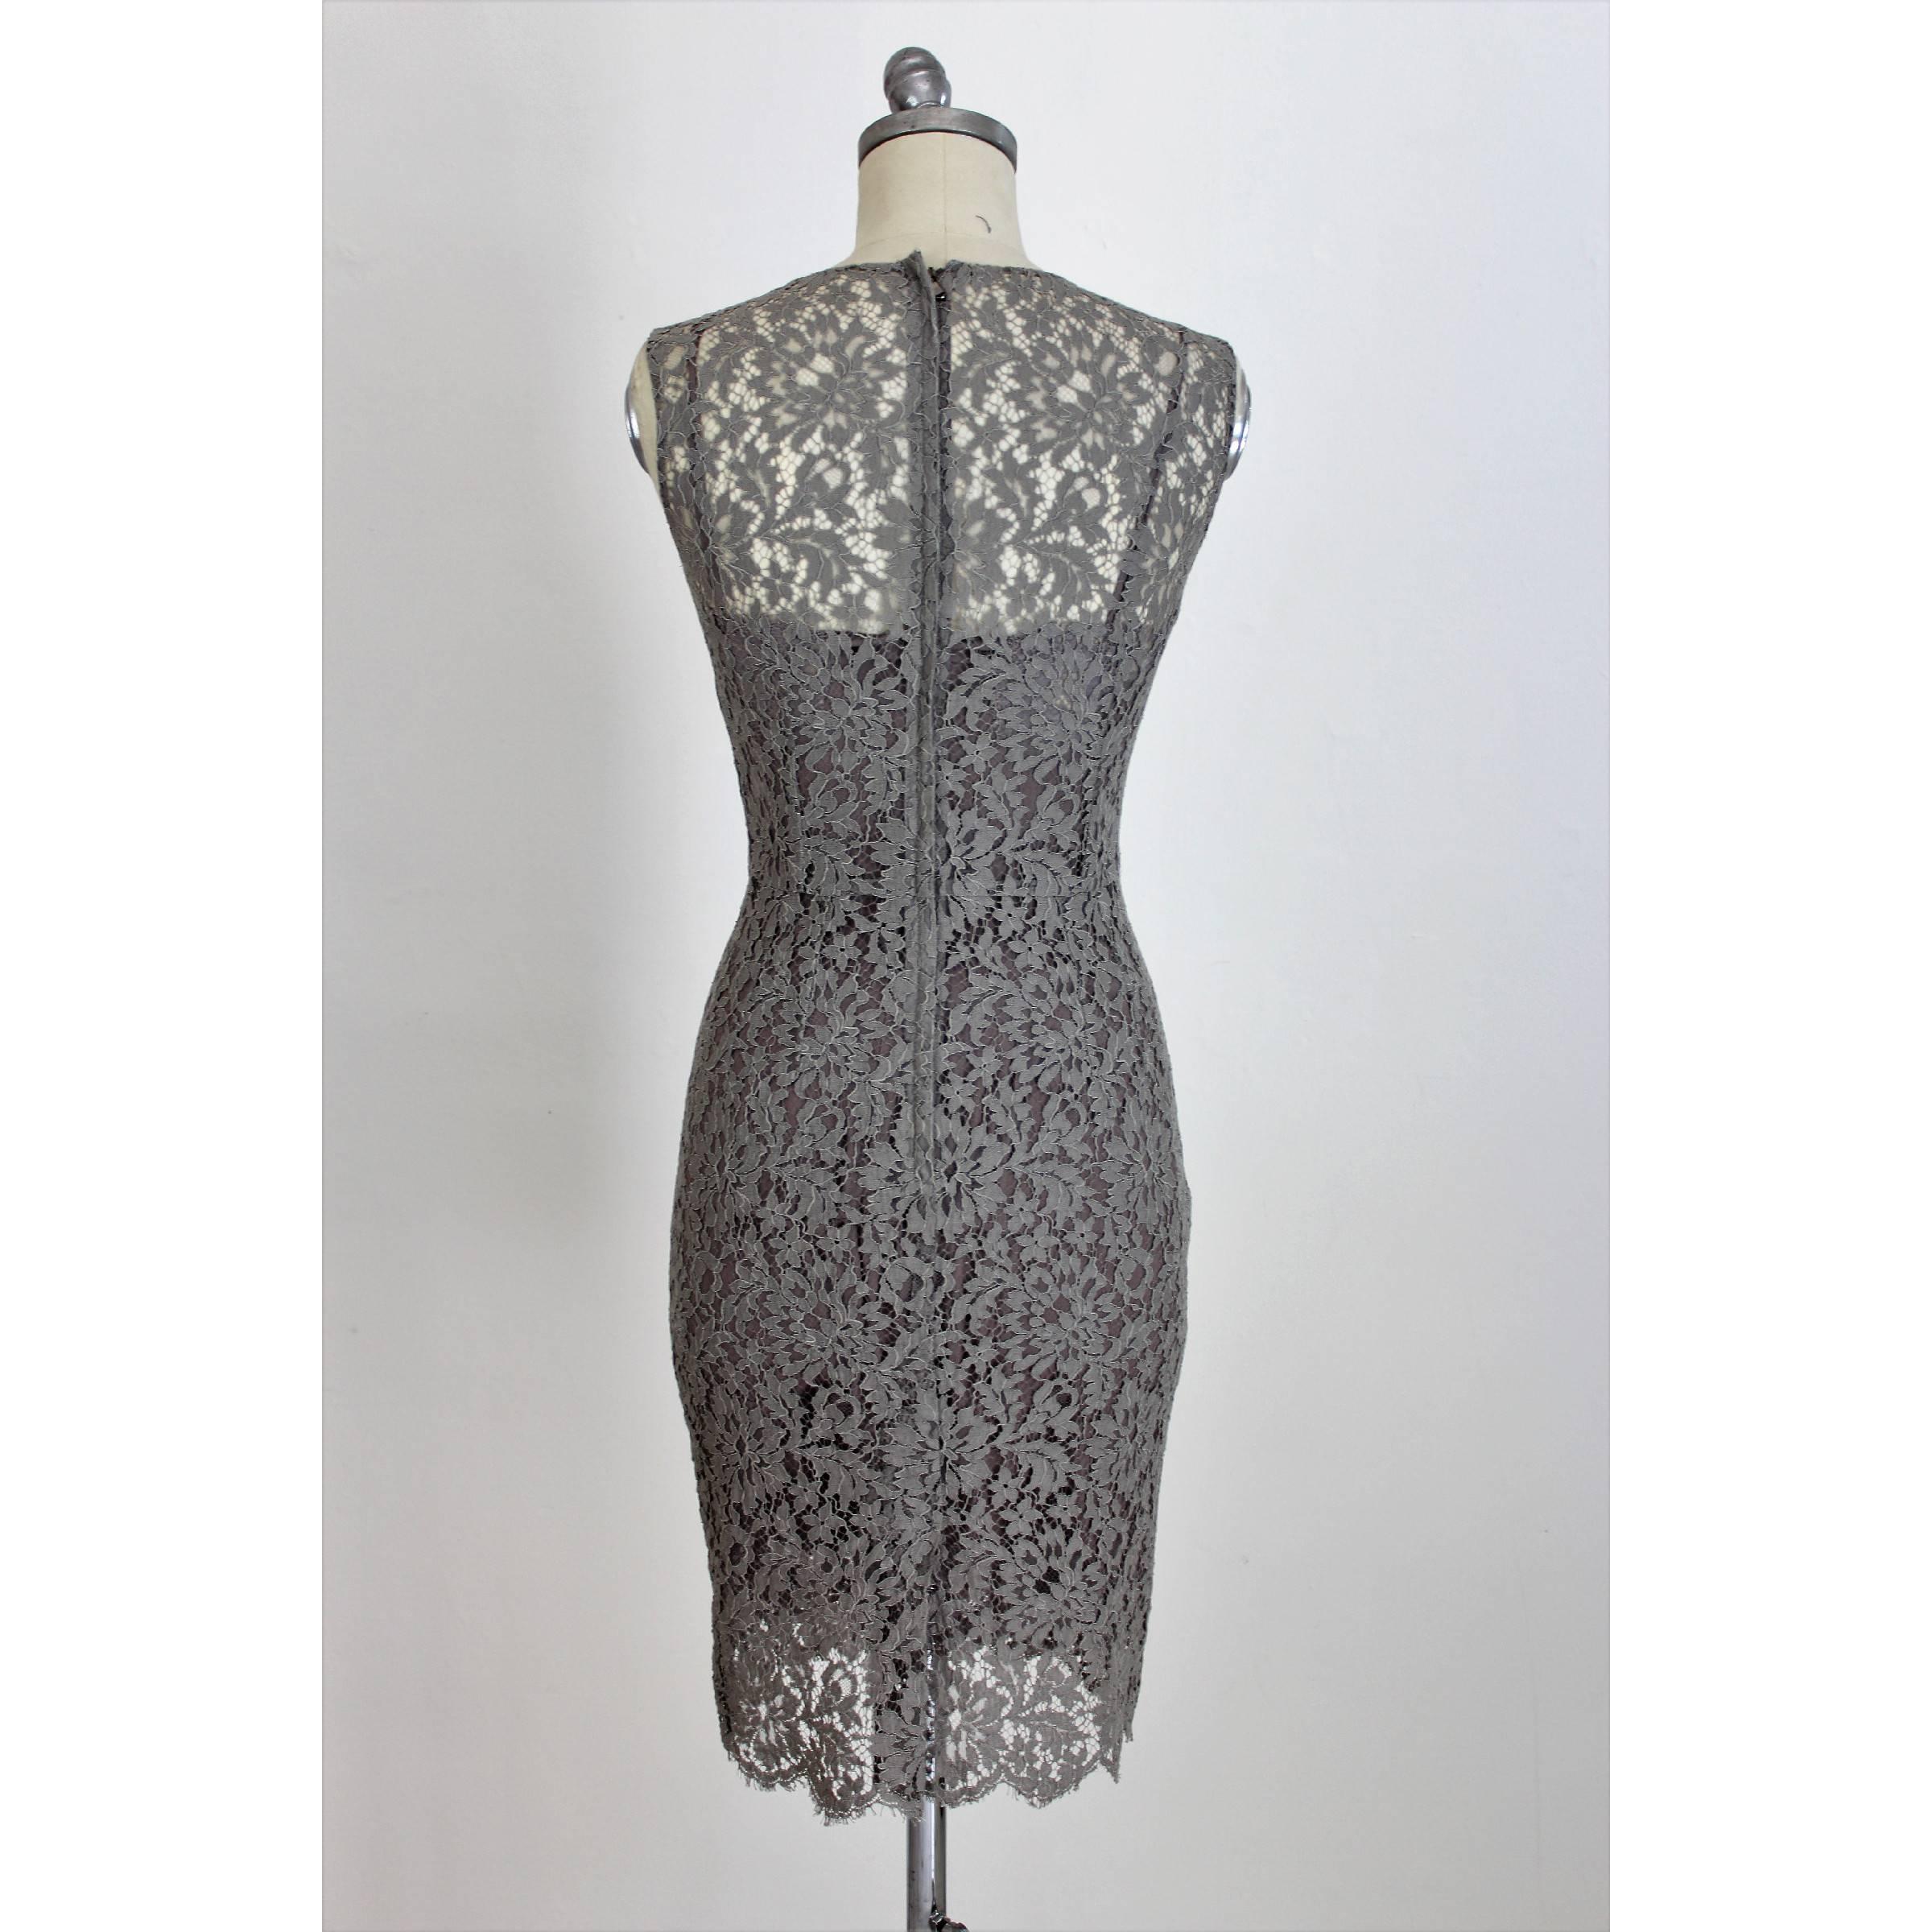 Dolce Gabbana vintage dress, light gray, silk and lace. Sheath dress, sleeveless lace crew-neck, silk petticoat. Zip closure along the back. Made in Italy. Excellent vintage coding.

Size 42 It 8 Us 10 Uk

Shoulders: 42 cm
Chest / bust: 46